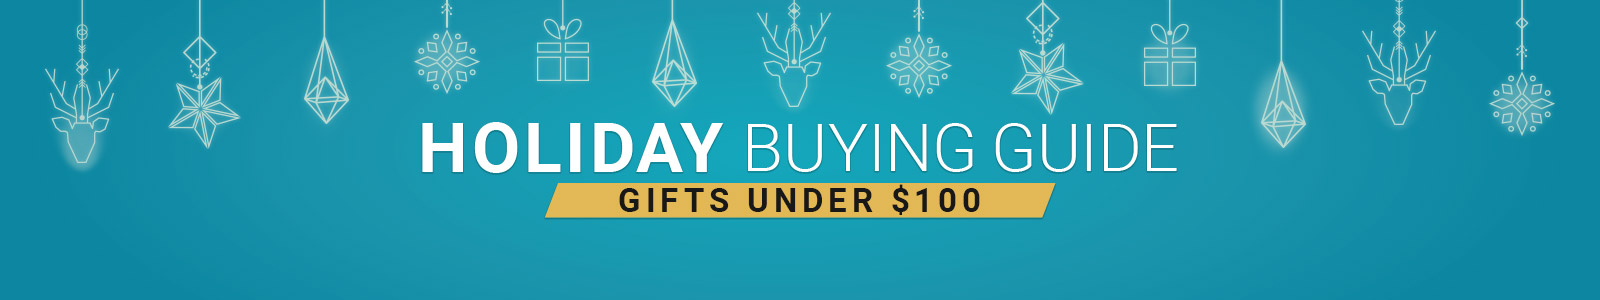 Holiday Buying Guide
Gifts under $100
Shop Now